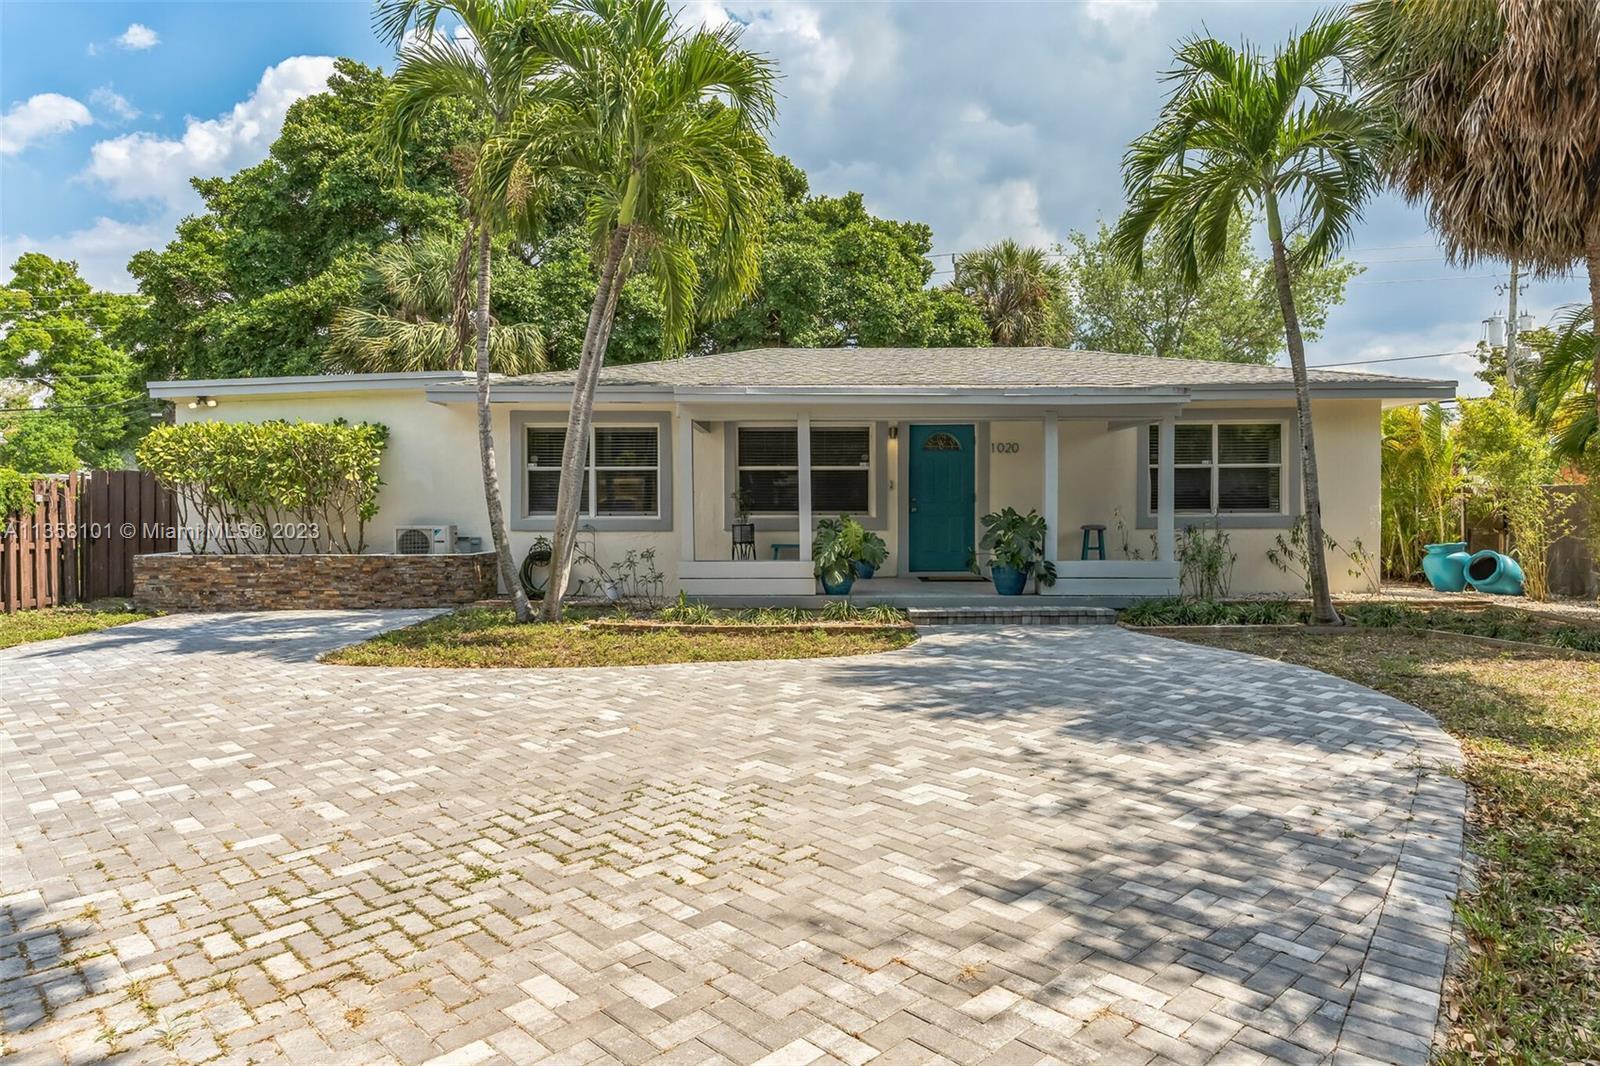 GORGEOUS remodeled 4 beds 2 baths home close to downtown Fort Lauderdale, Wilton Manor and beaches. 